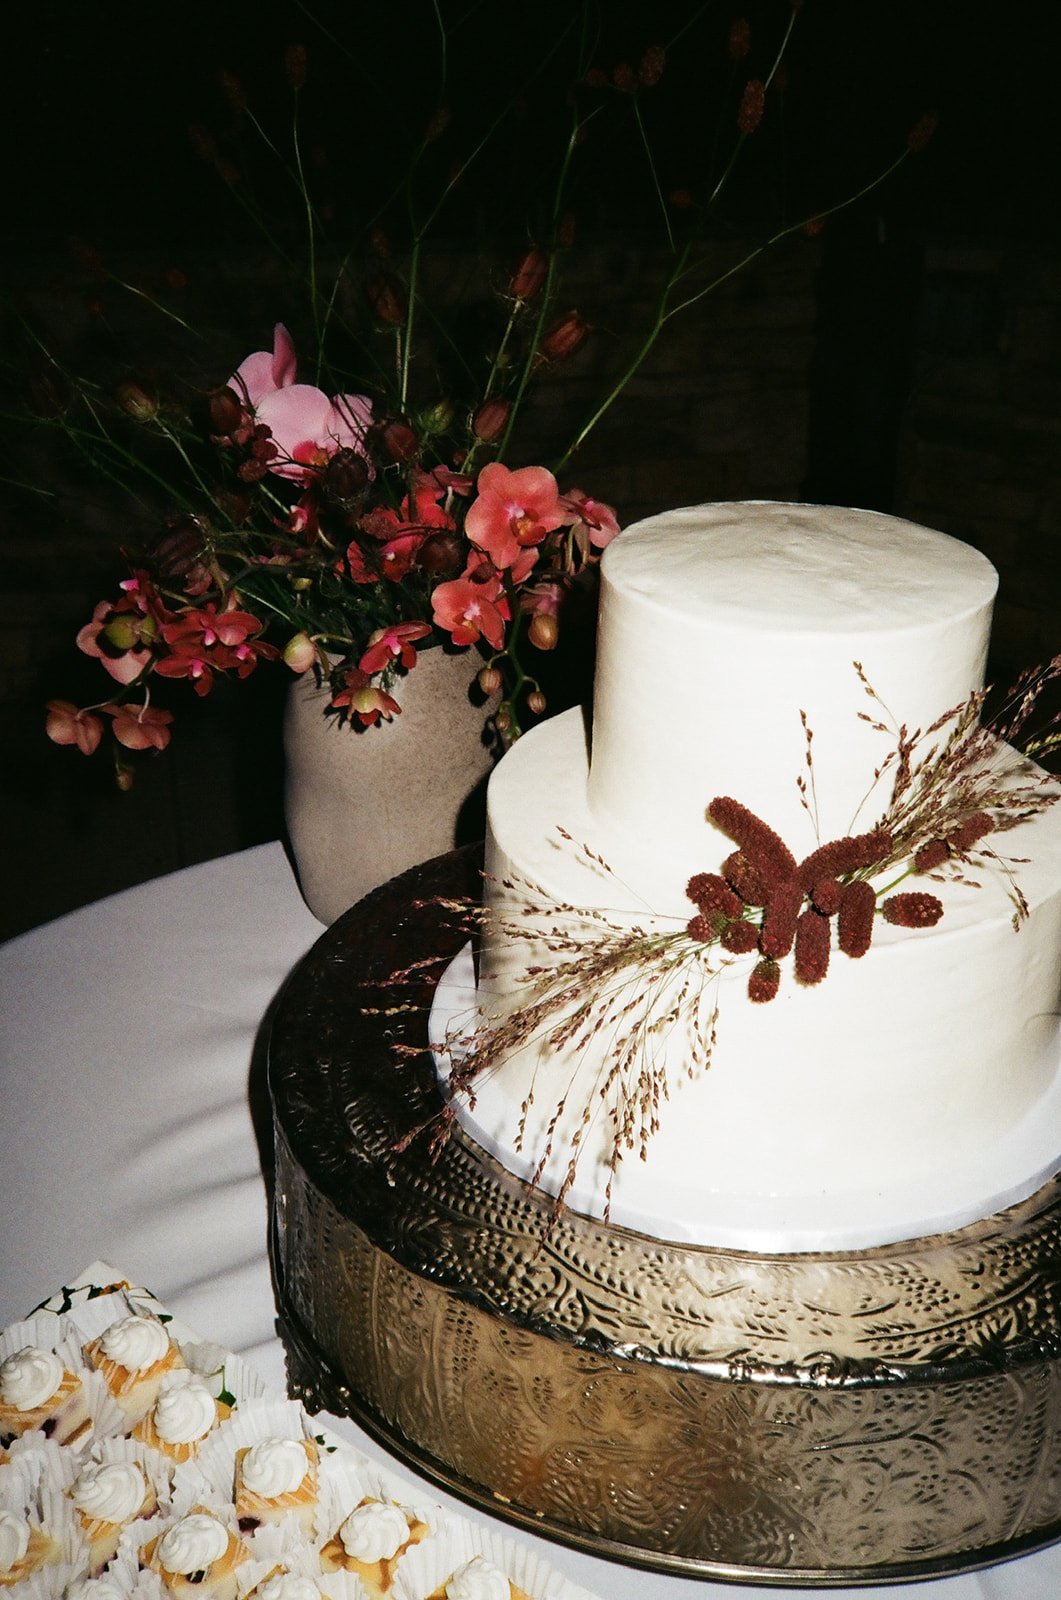 Film photo of white wedding cake and florals